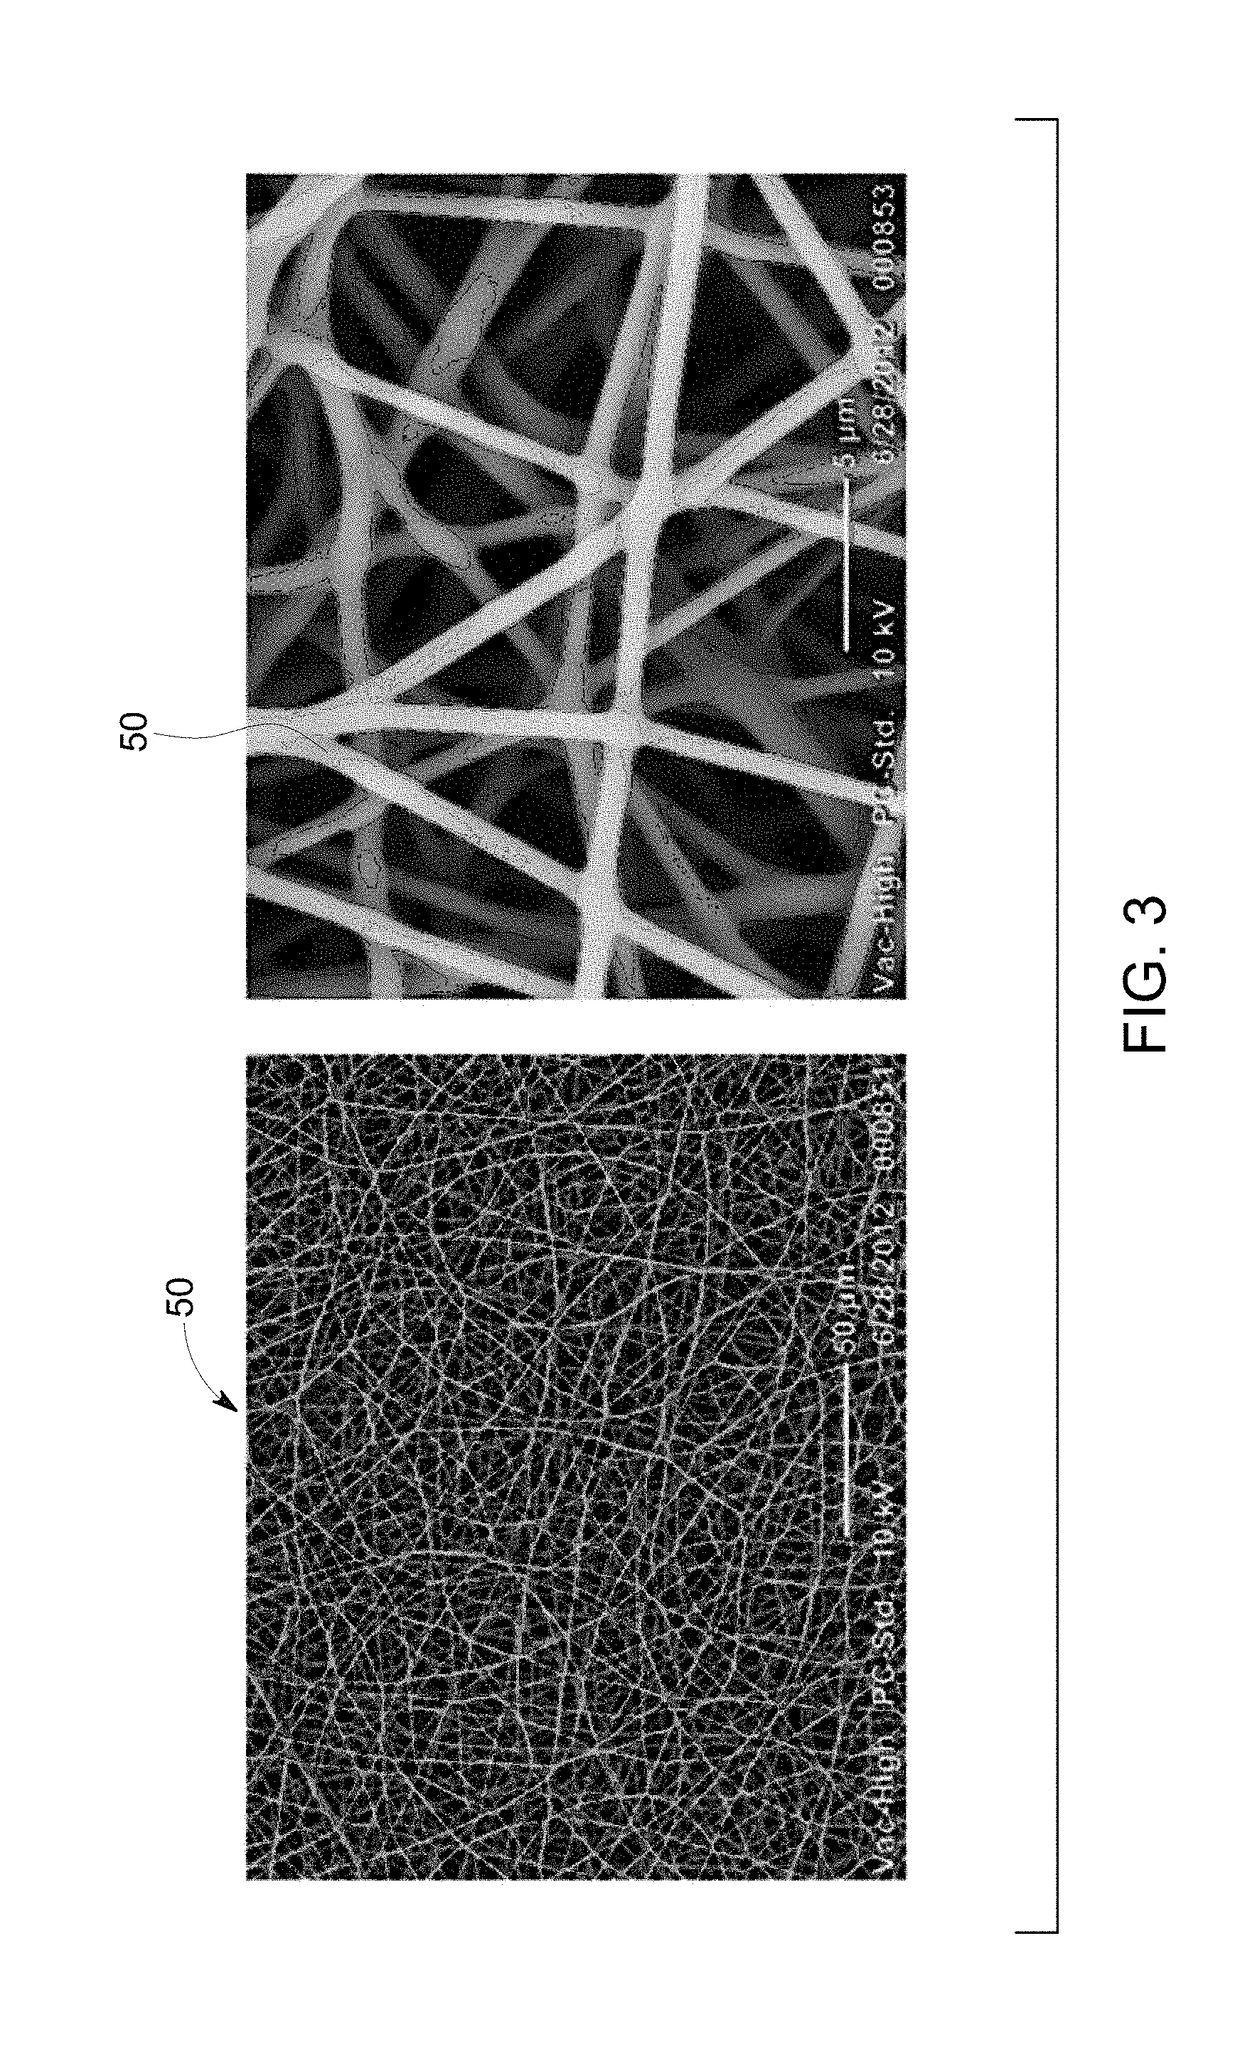 Electrospun fibers for protein stabilization and storage